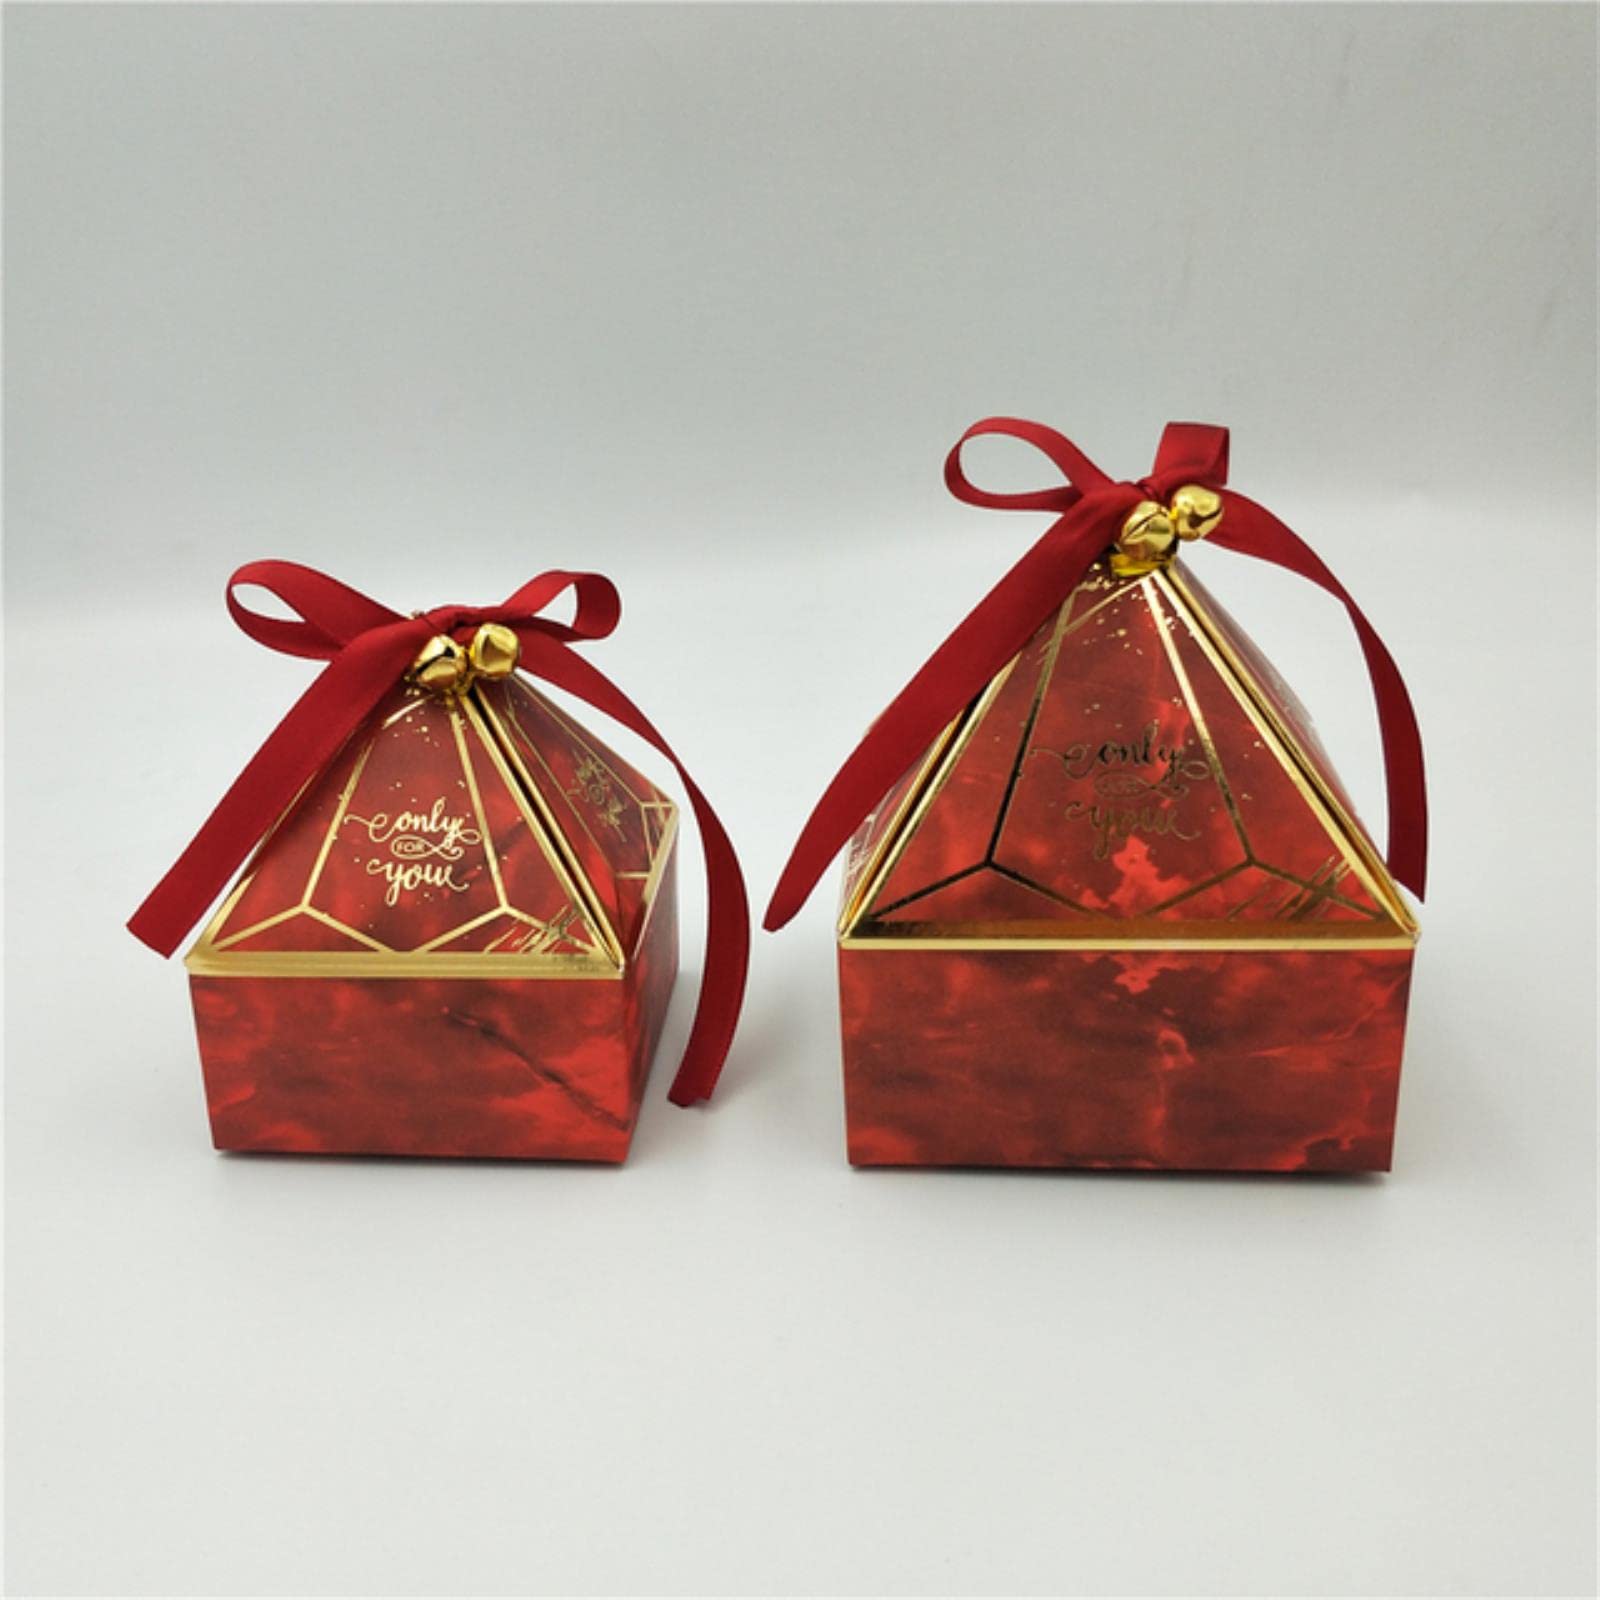 20 x Gift Boxes Wedding Party Candy Box Baby Shower Paper Chocolate Boxes Prismatic Creative Packaging Boxes-Red-Bell, S 7 x 7 x 8 cm von generic